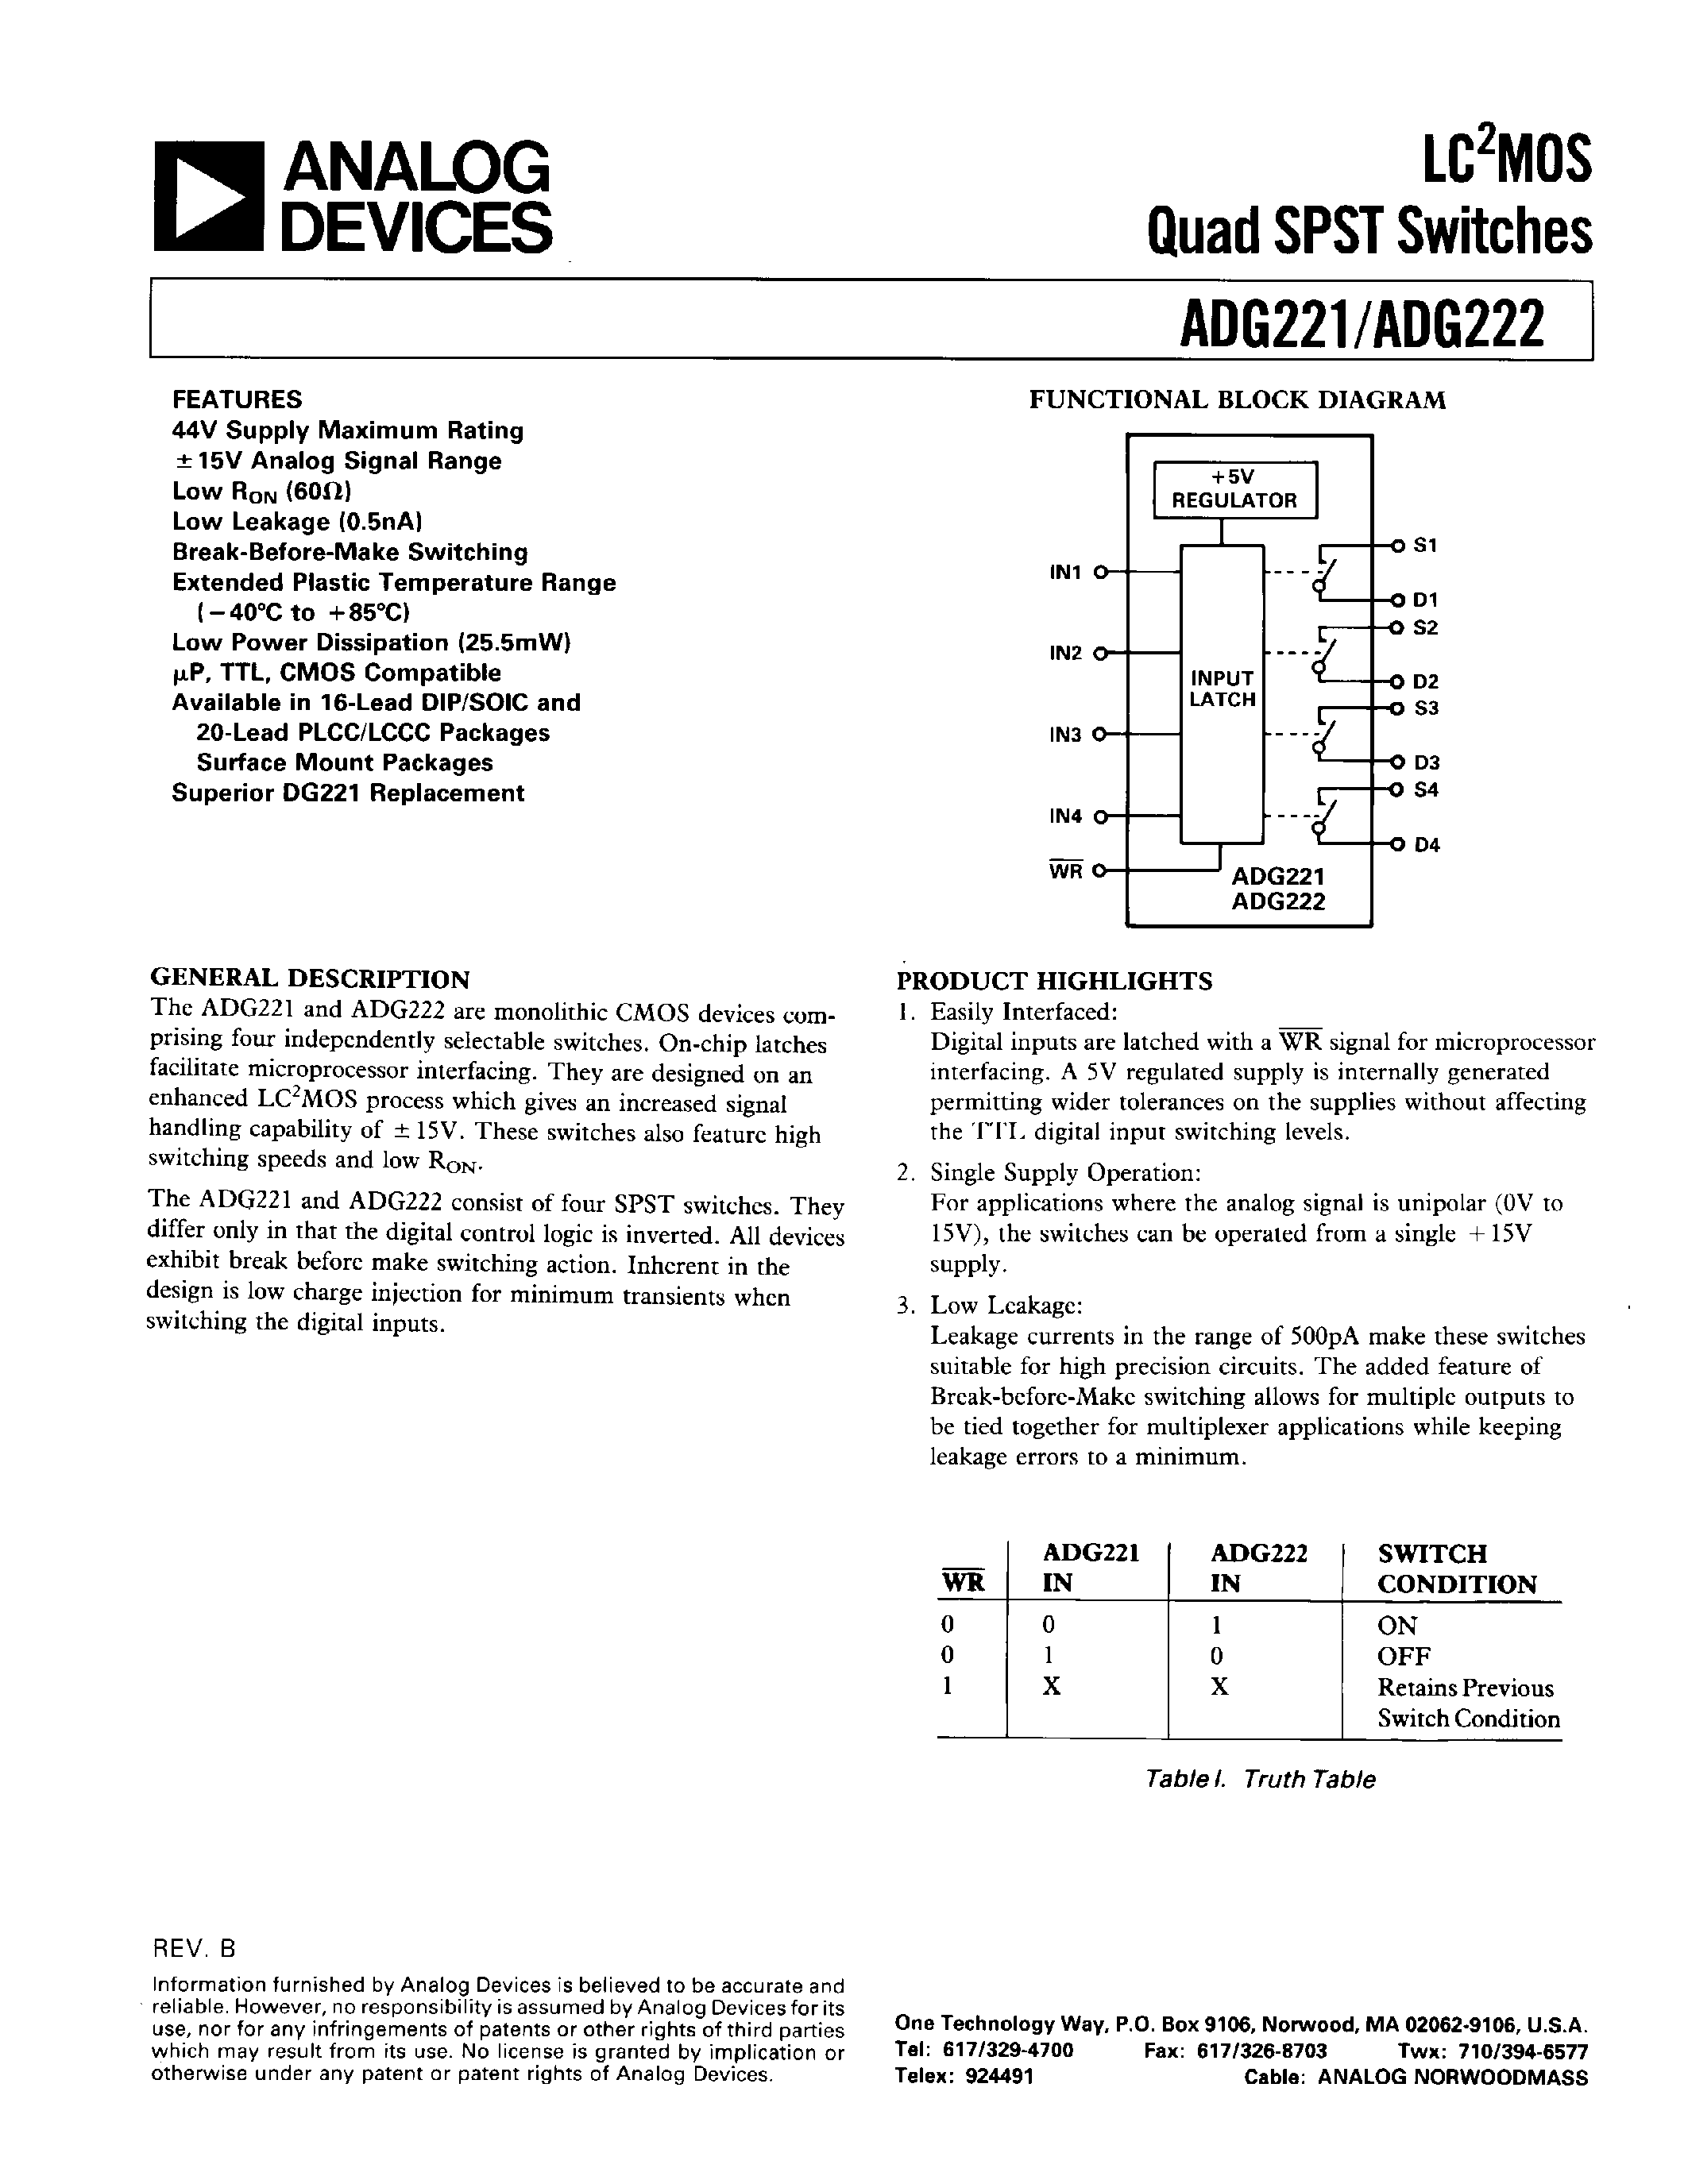 Datasheet ADG221KP - LC2MOS QUAD SPST SWITCHES page 1